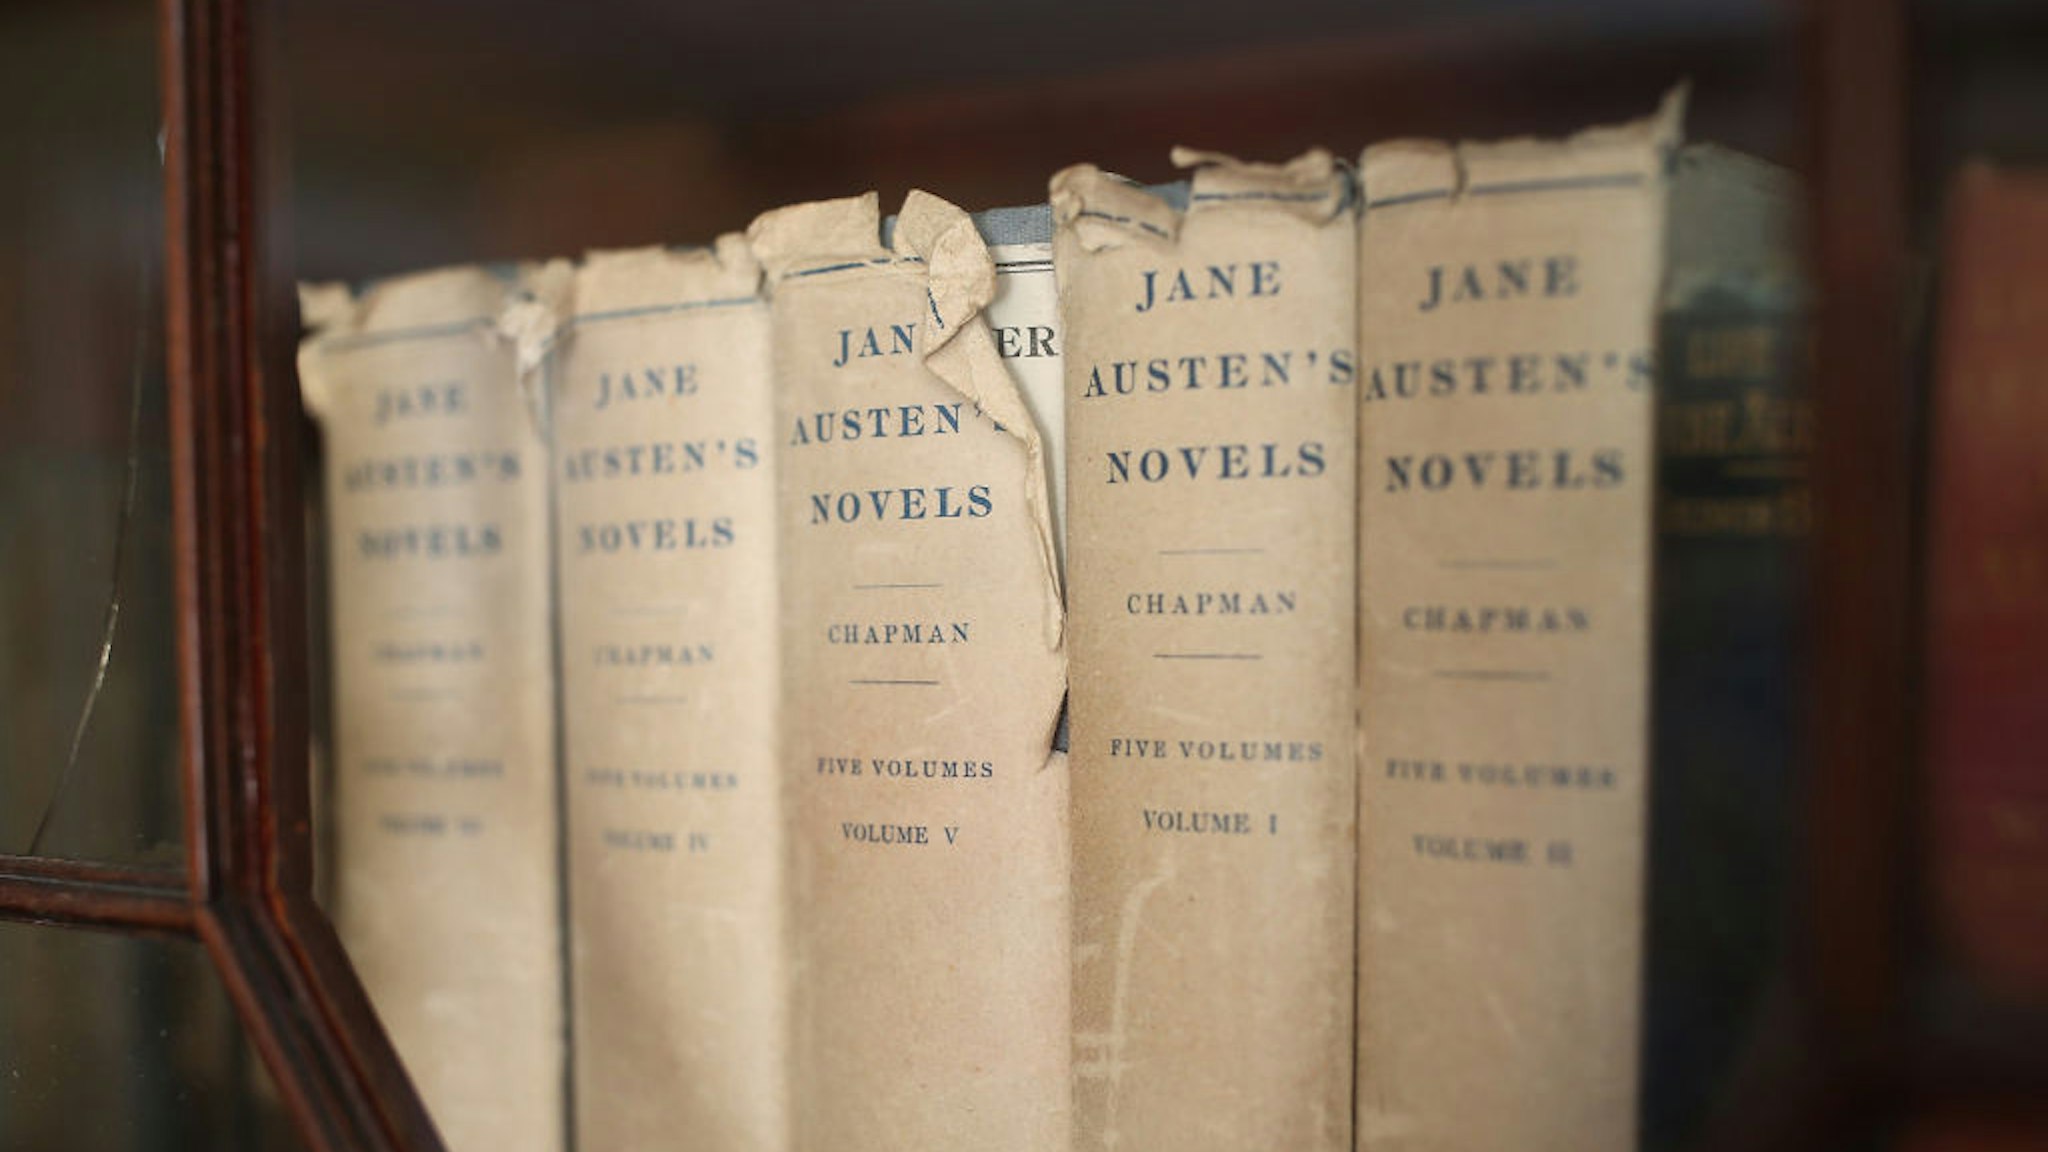 CHAWTON, ENGLAND - JULY 18: Books are displayed at the home of the celebrated late British author Jane Austen on July 18, 2017 in Chawton, England. Jane Austen spent the last eight years of her life in the cottage in Hampshire from 1809 until 1817, before dying on July 18, 1817, of an unknown illness. Today marks the 200th anniversary of her death. (Photo by Dan Kitwood/Getty Images)